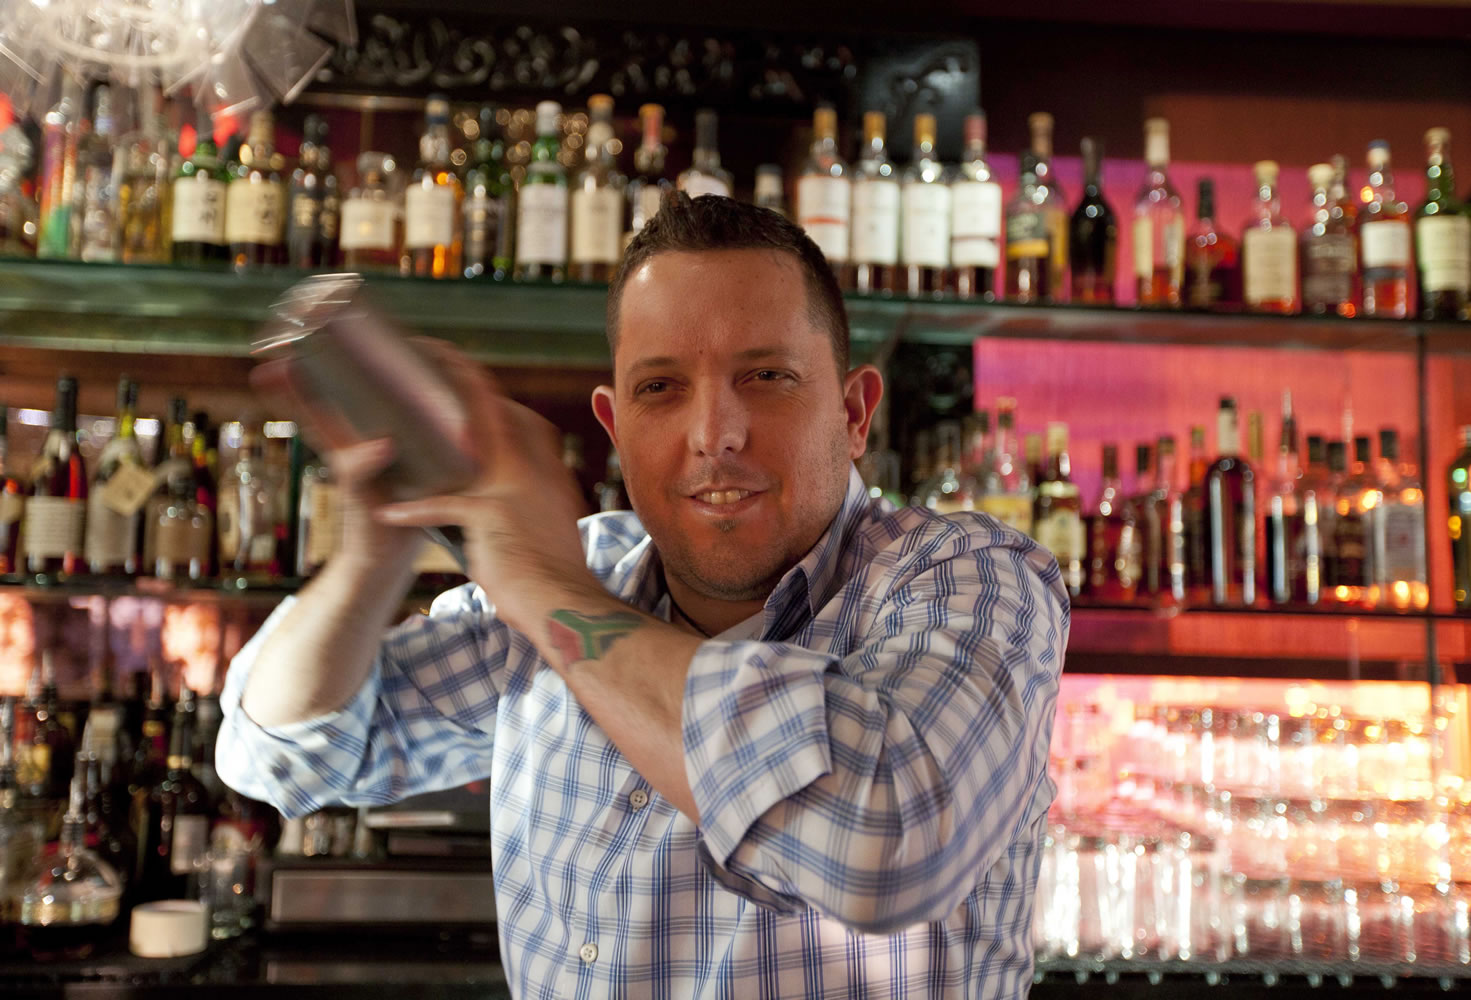 Mixologist Jacques Bezuidenhout prepares a gin Martini cocktail in the Starlight Room of the Sir Francis Drake Hotel in San Francisco.